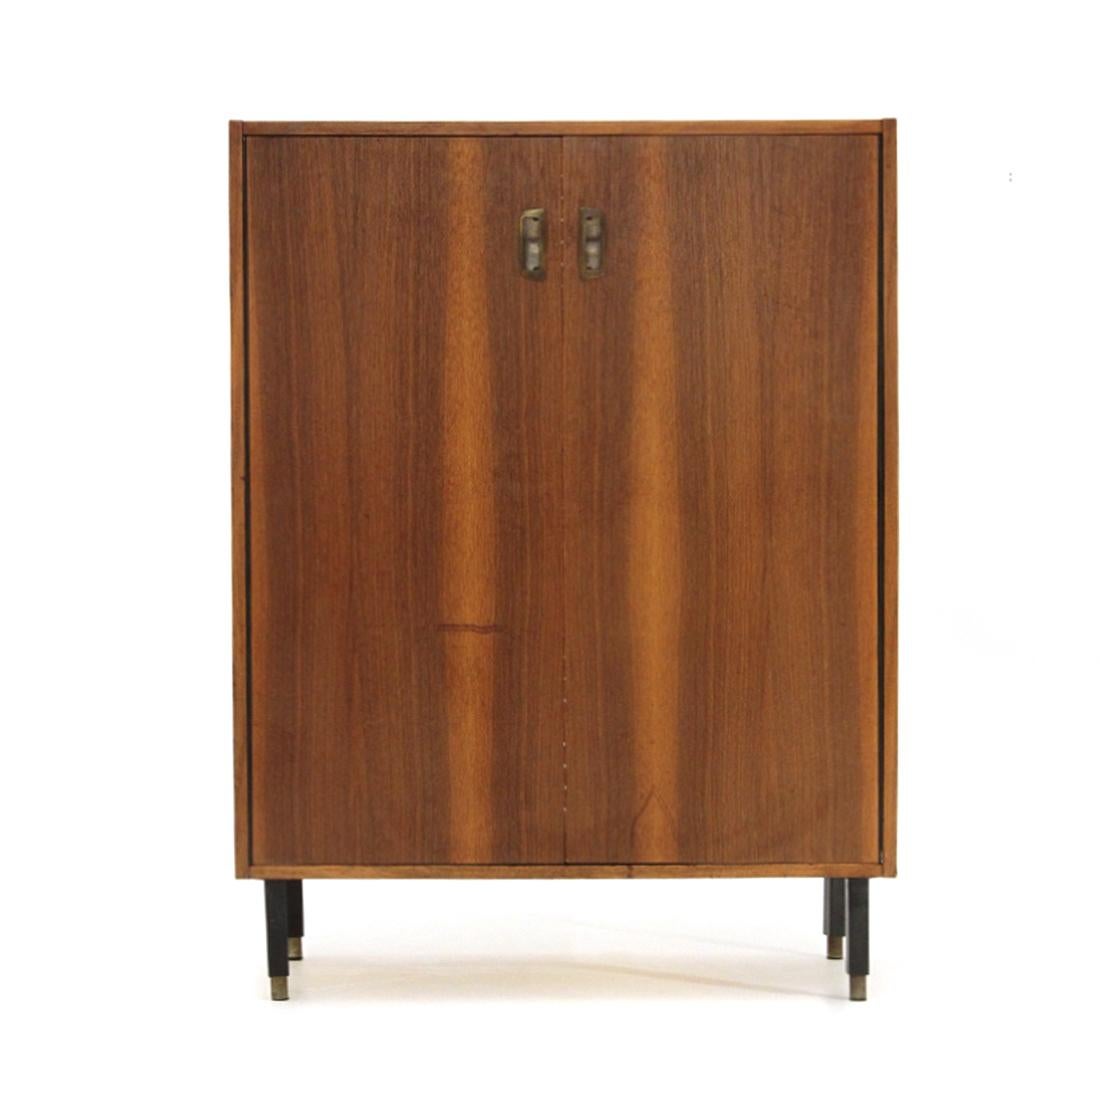 Italian-made shoe cabinet produced in the 1950s.
Structure in teak veneered wood.
Brass handles.
Shoe rack made of plastic tubes adjustable in different positions.
Legs in black painted metal, with terminal in knurled aluminum, adjustable in